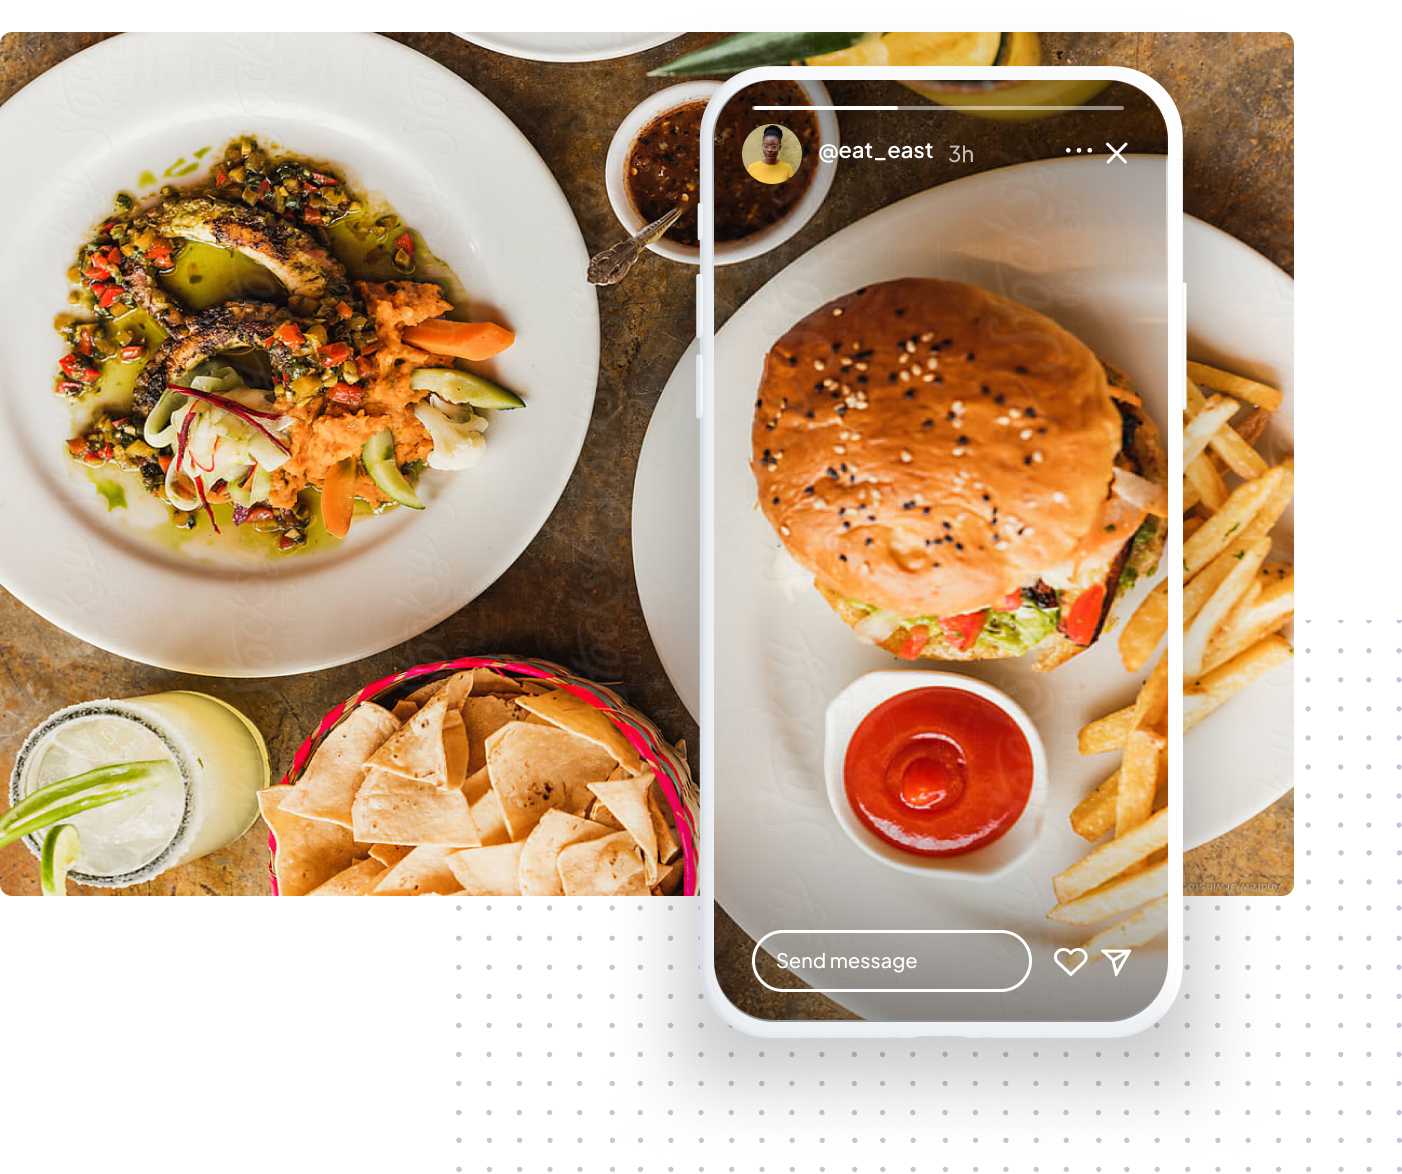 A phone is taking a photo of the underlying image of a burger